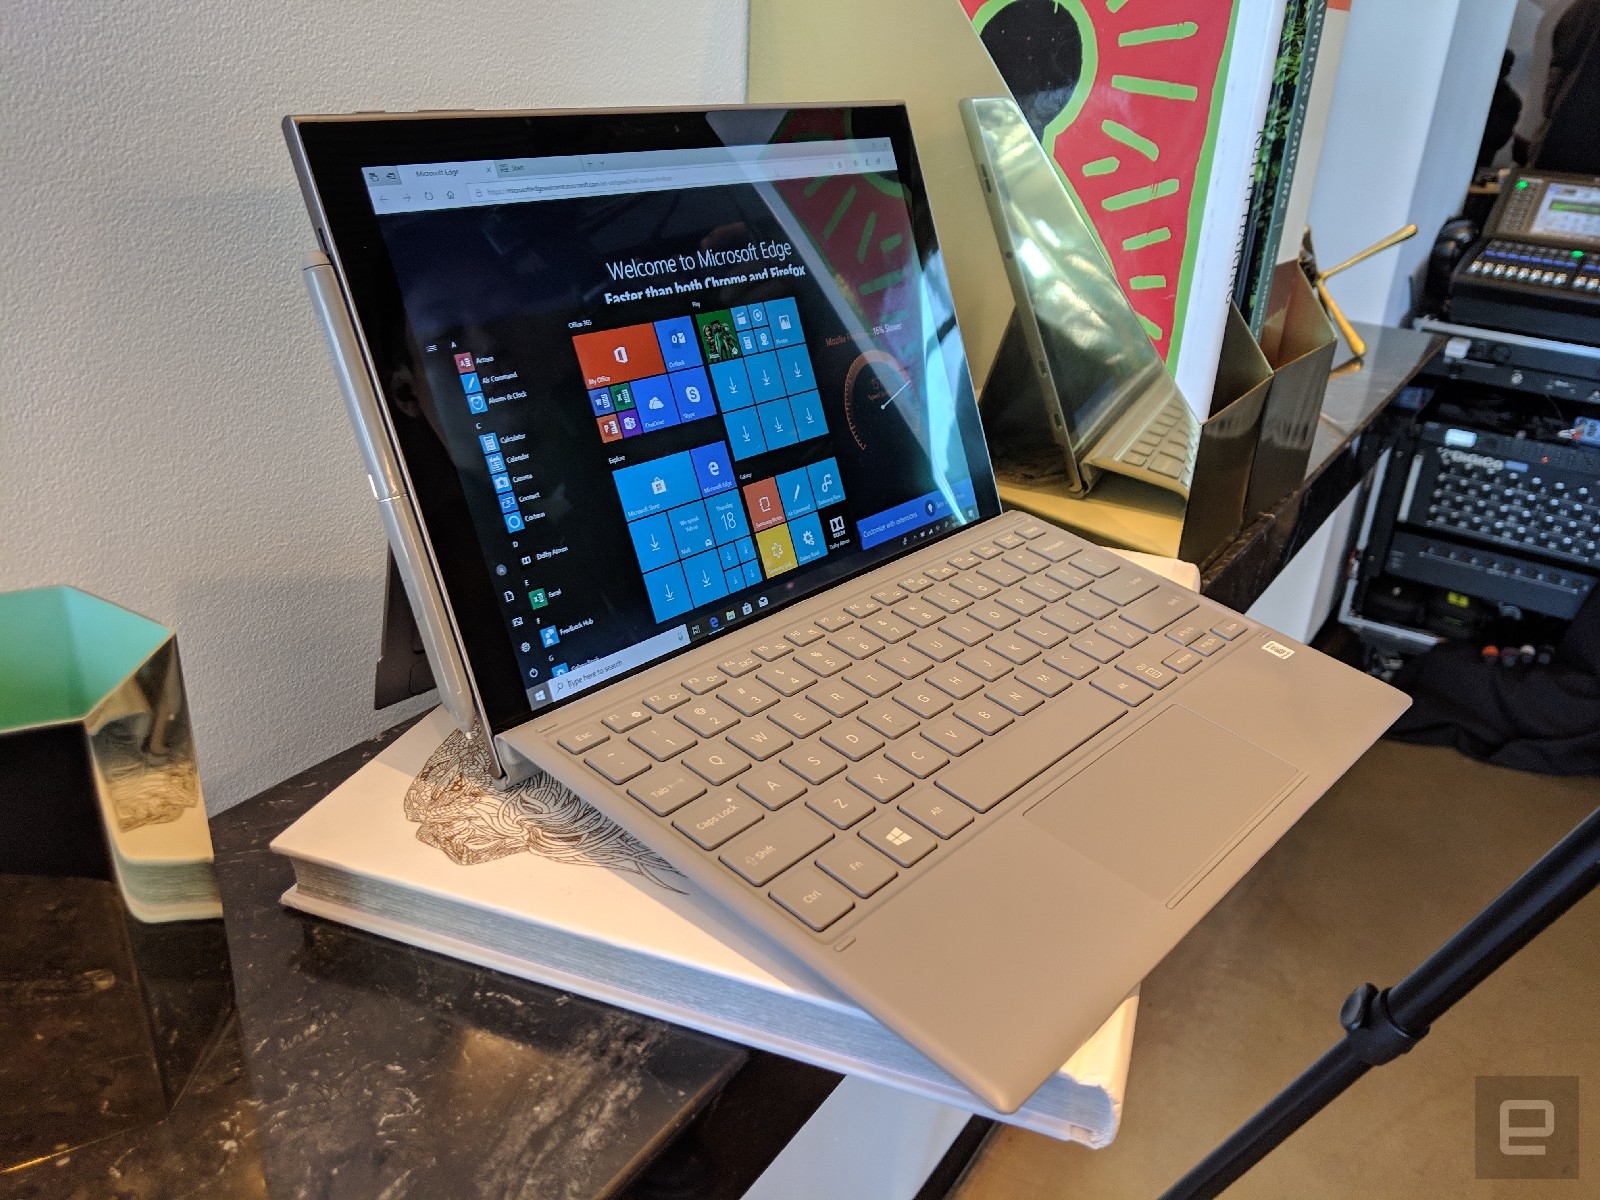 Samsung Galaxy Book 2 hands-on: A Snapdragon-powered Surface rival | DeviceDaily.com